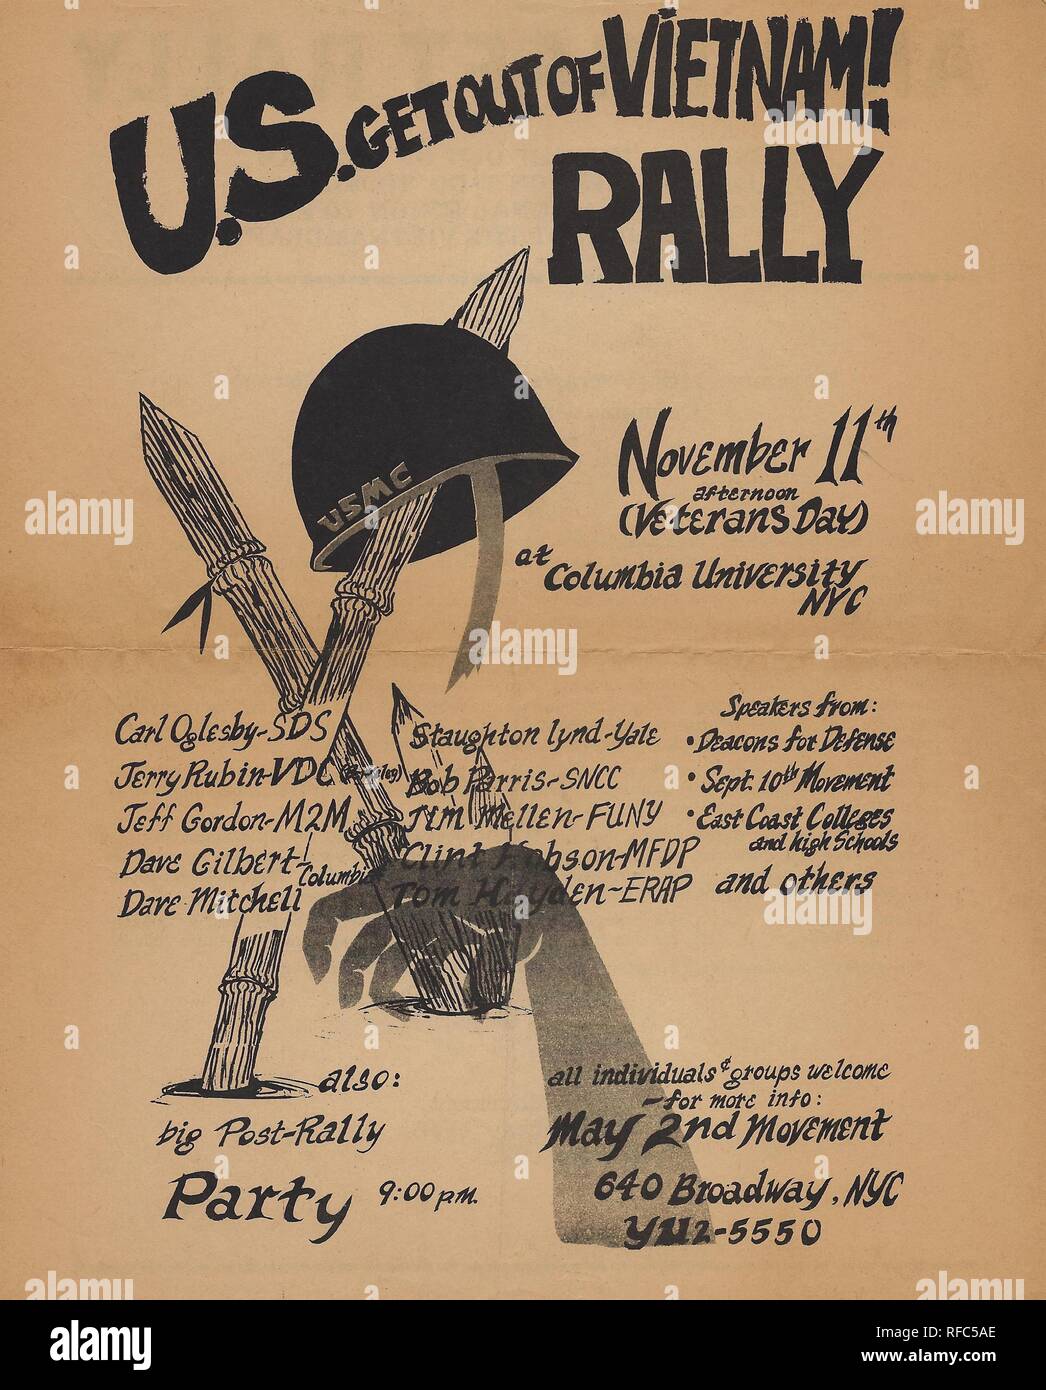 Black and white poster advertising an Anti-War rally, titled 'US Get Out of Vietnam! Rally,' and slated to take place on November 11th (Veterans Day) at Columbia University, with an image of a sharpened bamboo piercing a USMC hat, and the ominous silhouette of a hand rising from the lower register, published in New York City, during the Vietnam War, 1965. () Stock Photo